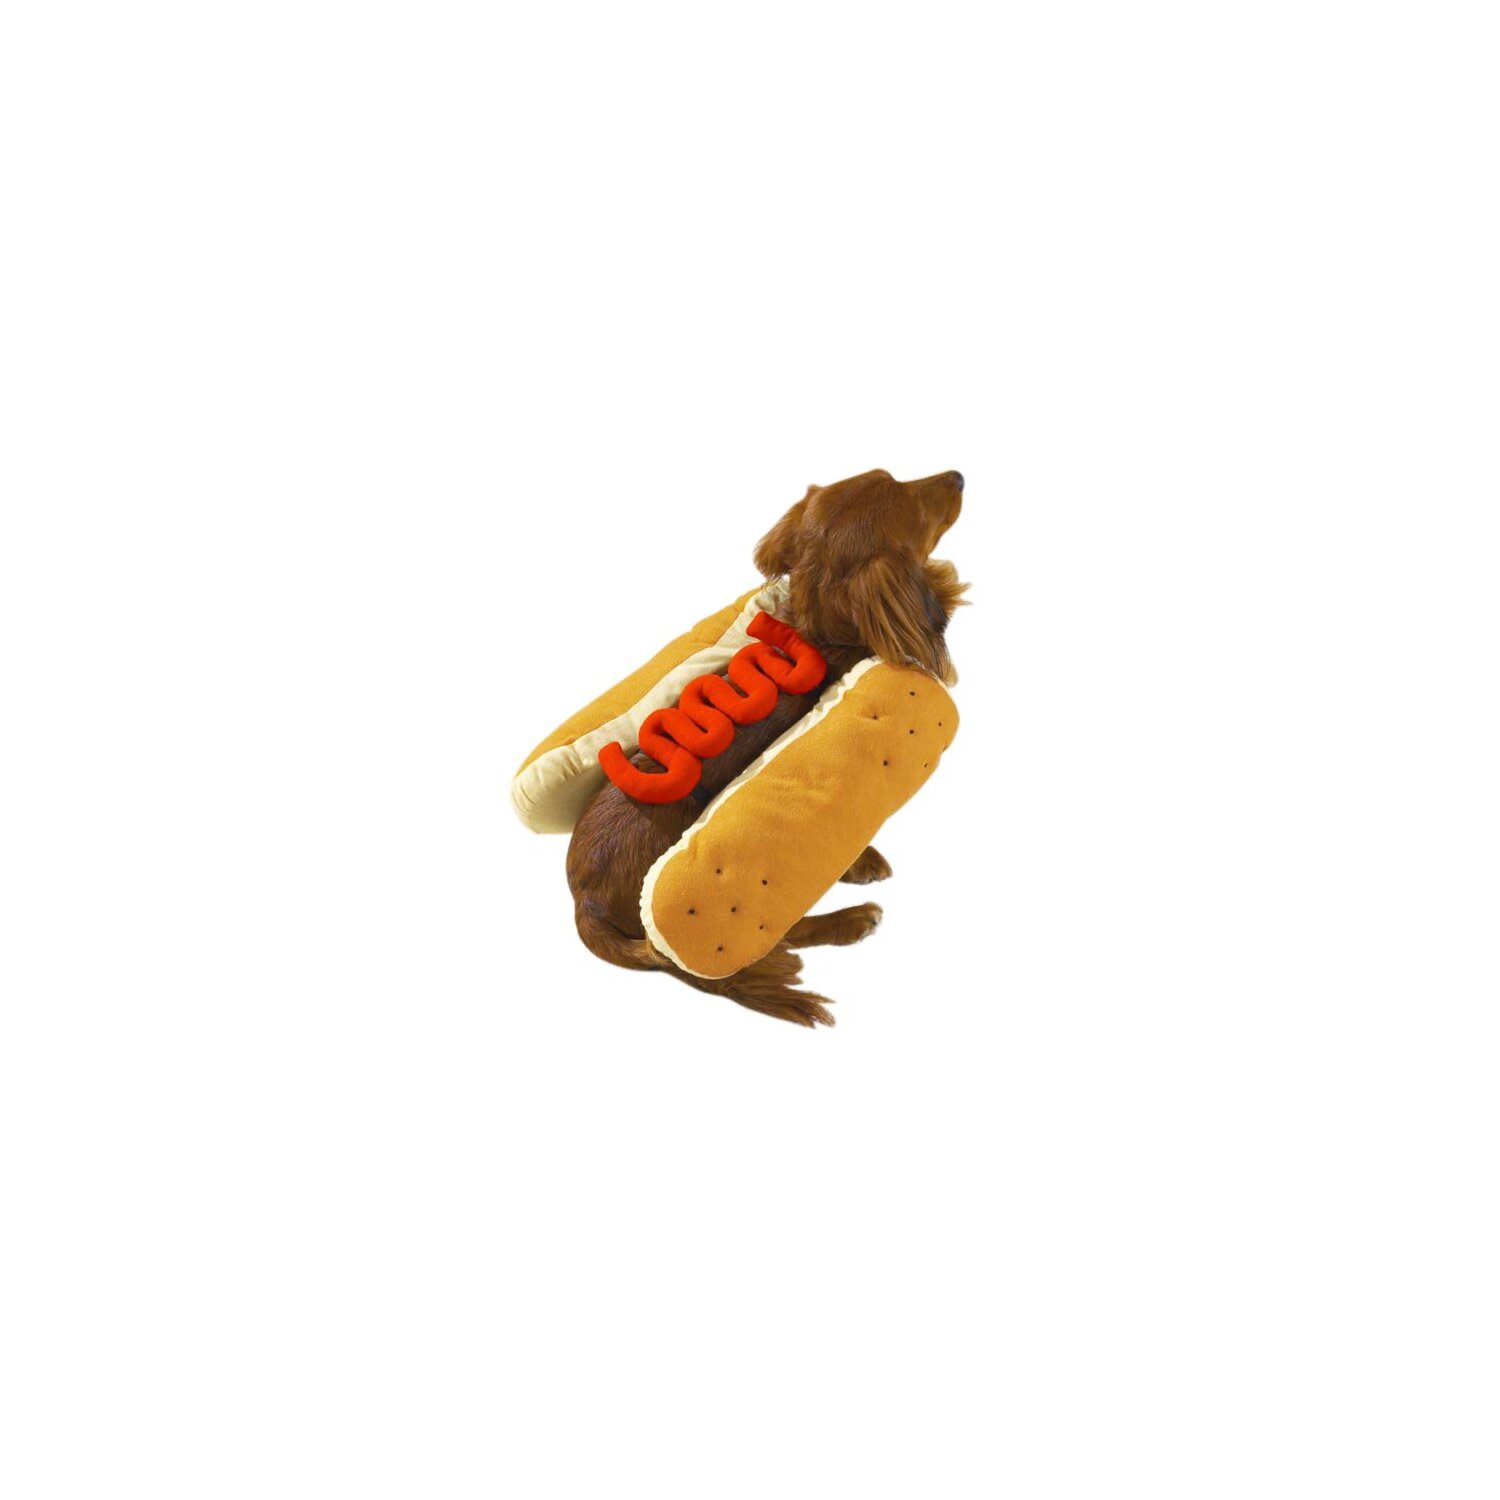 Casual Canine Hot Diggity Dog with Mustard Costume for Dogs, 14" Small/Medium - image 1 of 3